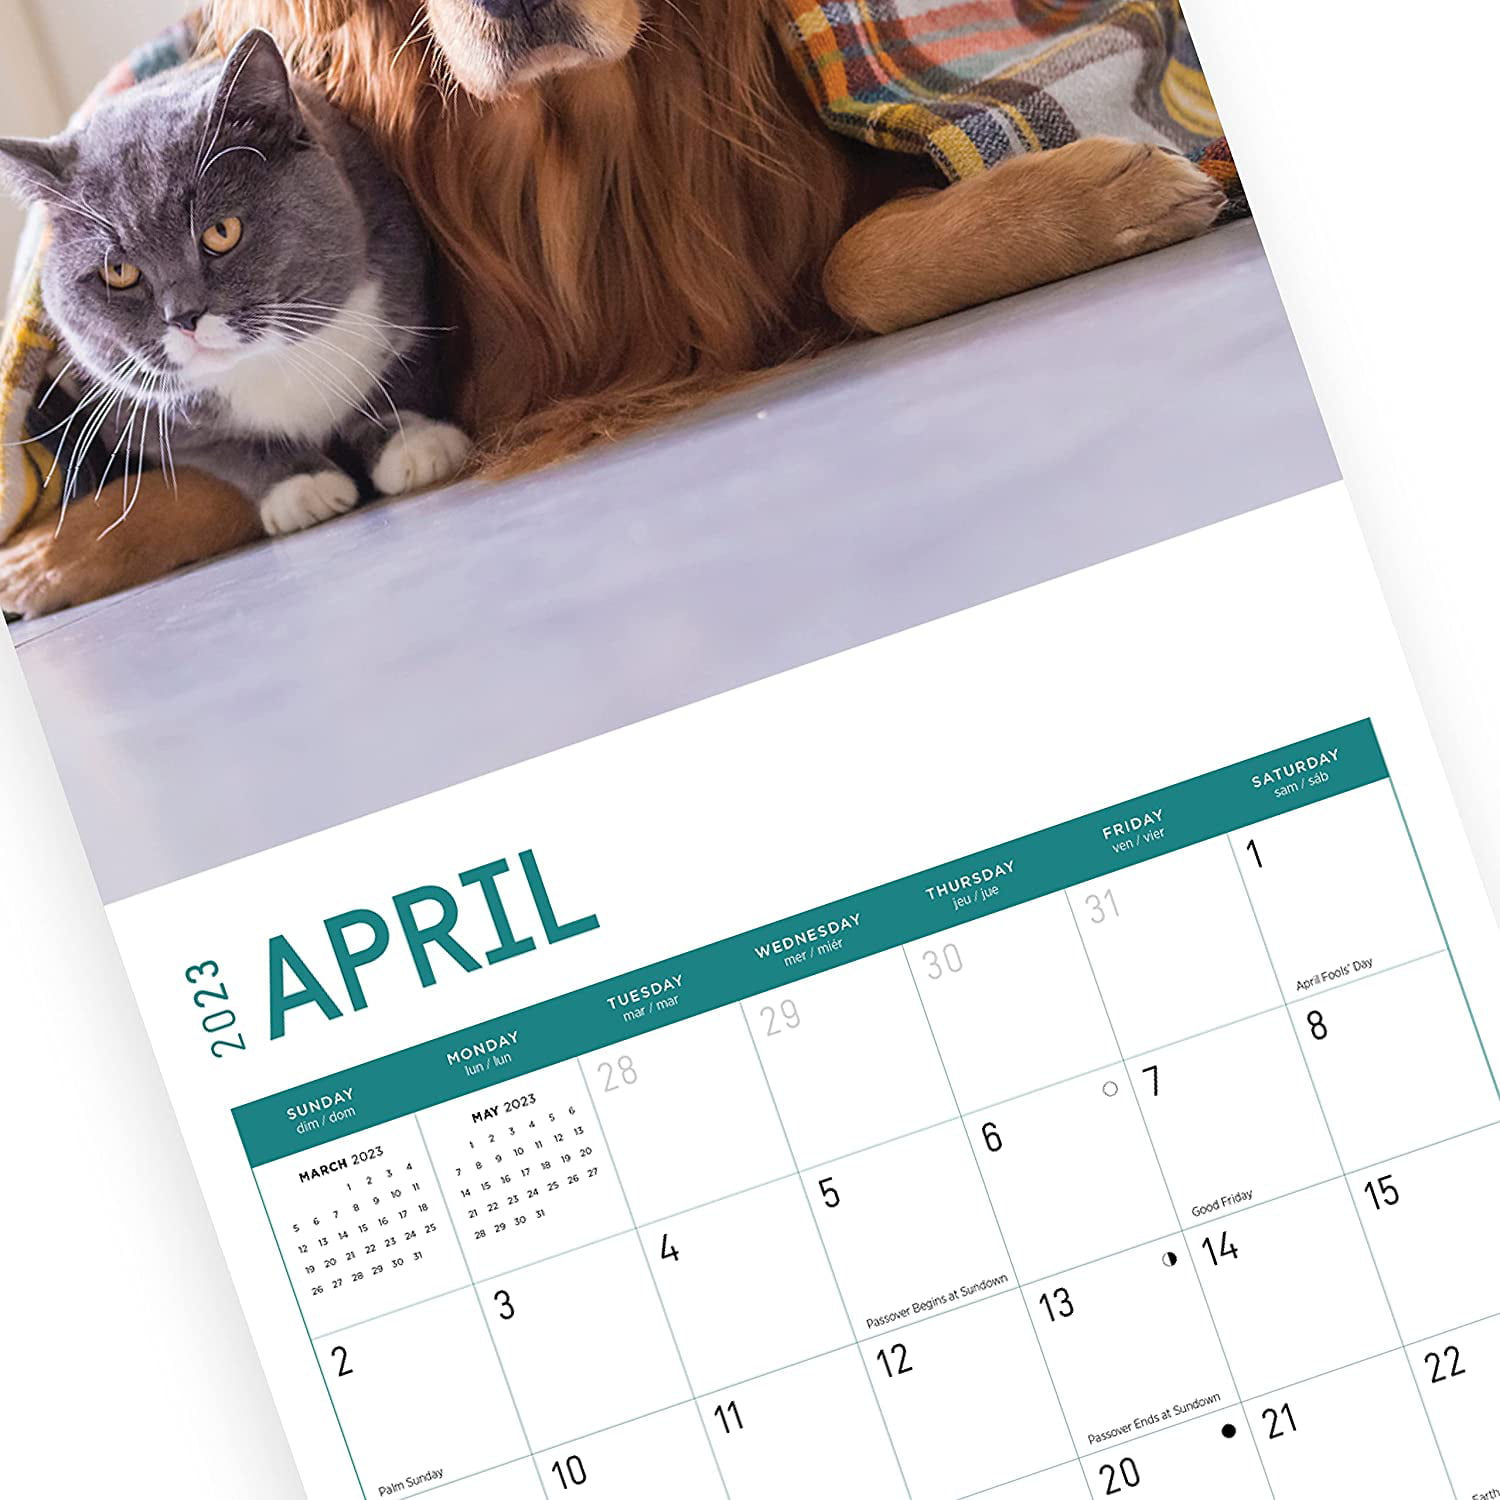 Digital Planner - Dogs and Cats 12 Month Calendar and Notes – Sparkle and  Comfort